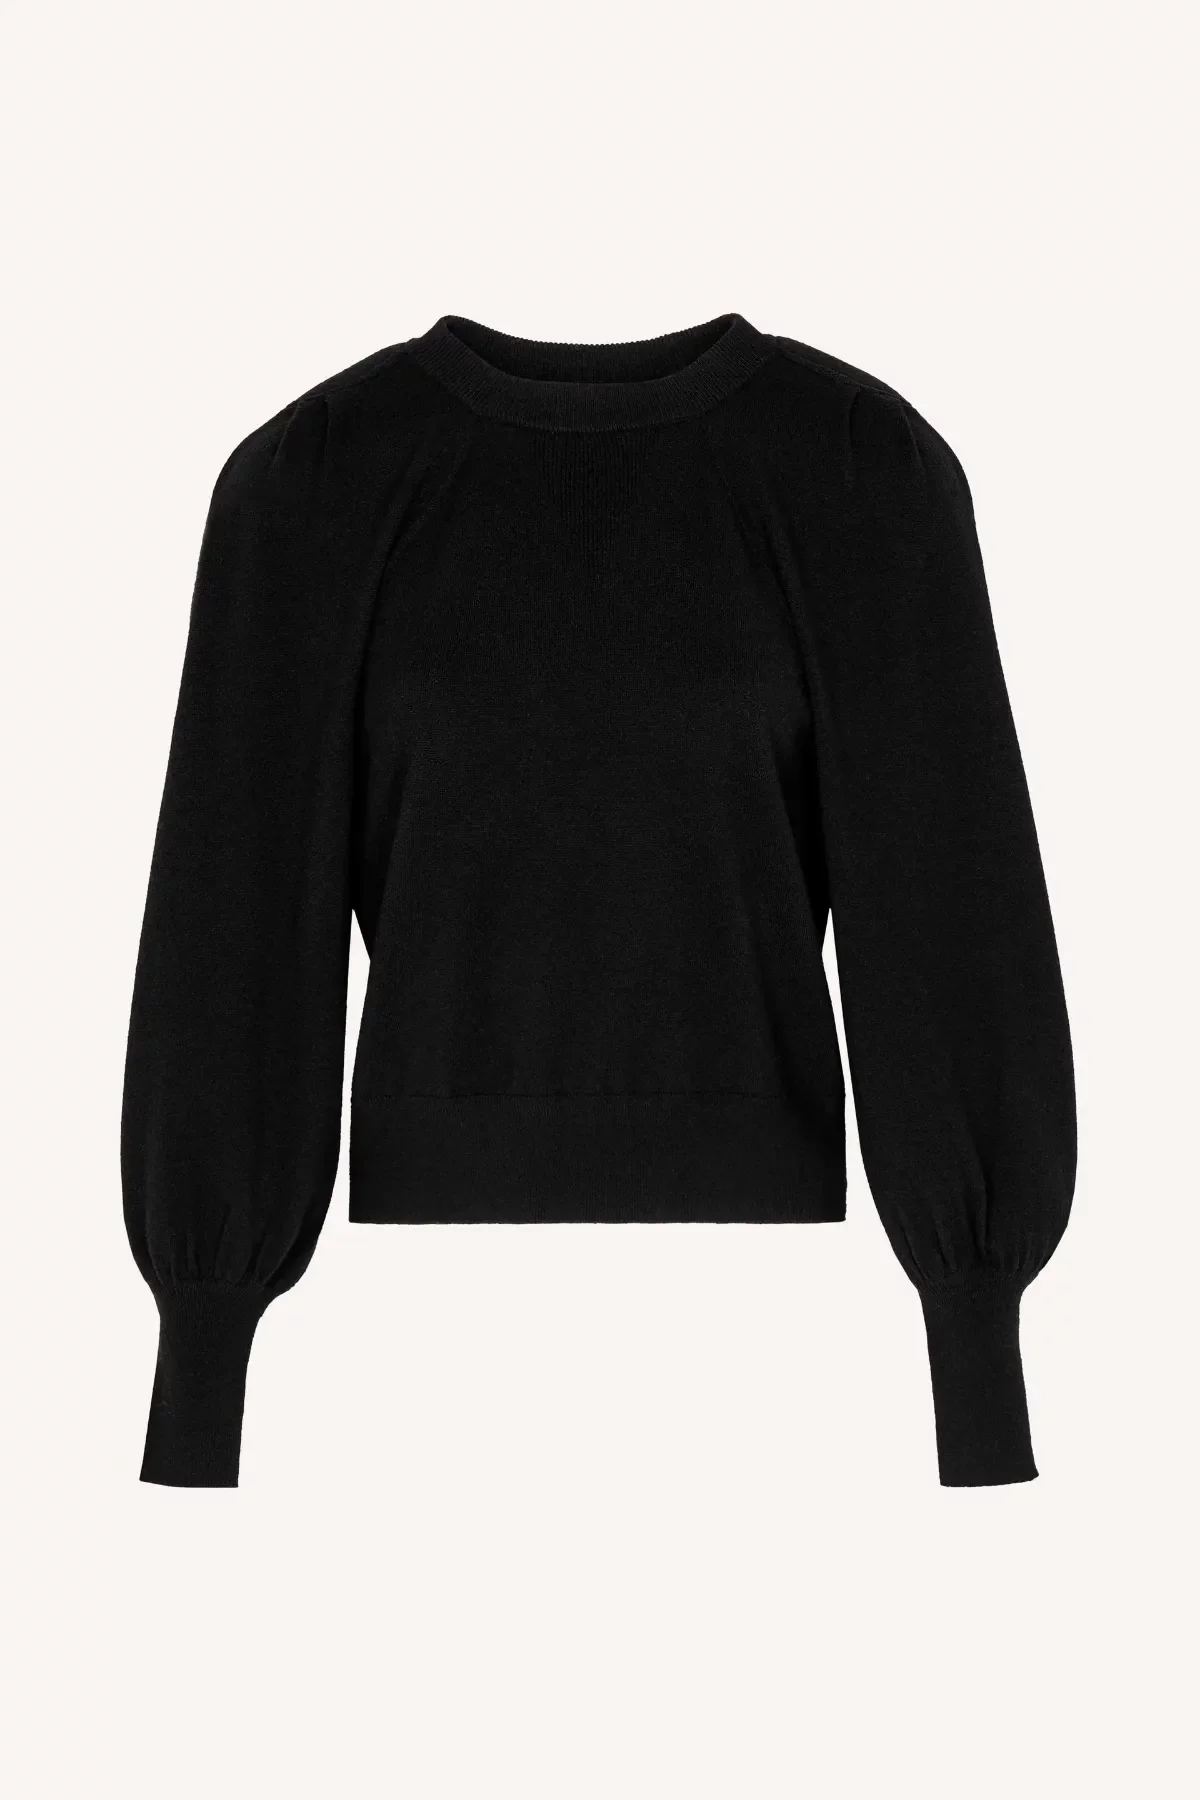 by-bar amsterdam - lore pullover - black 5